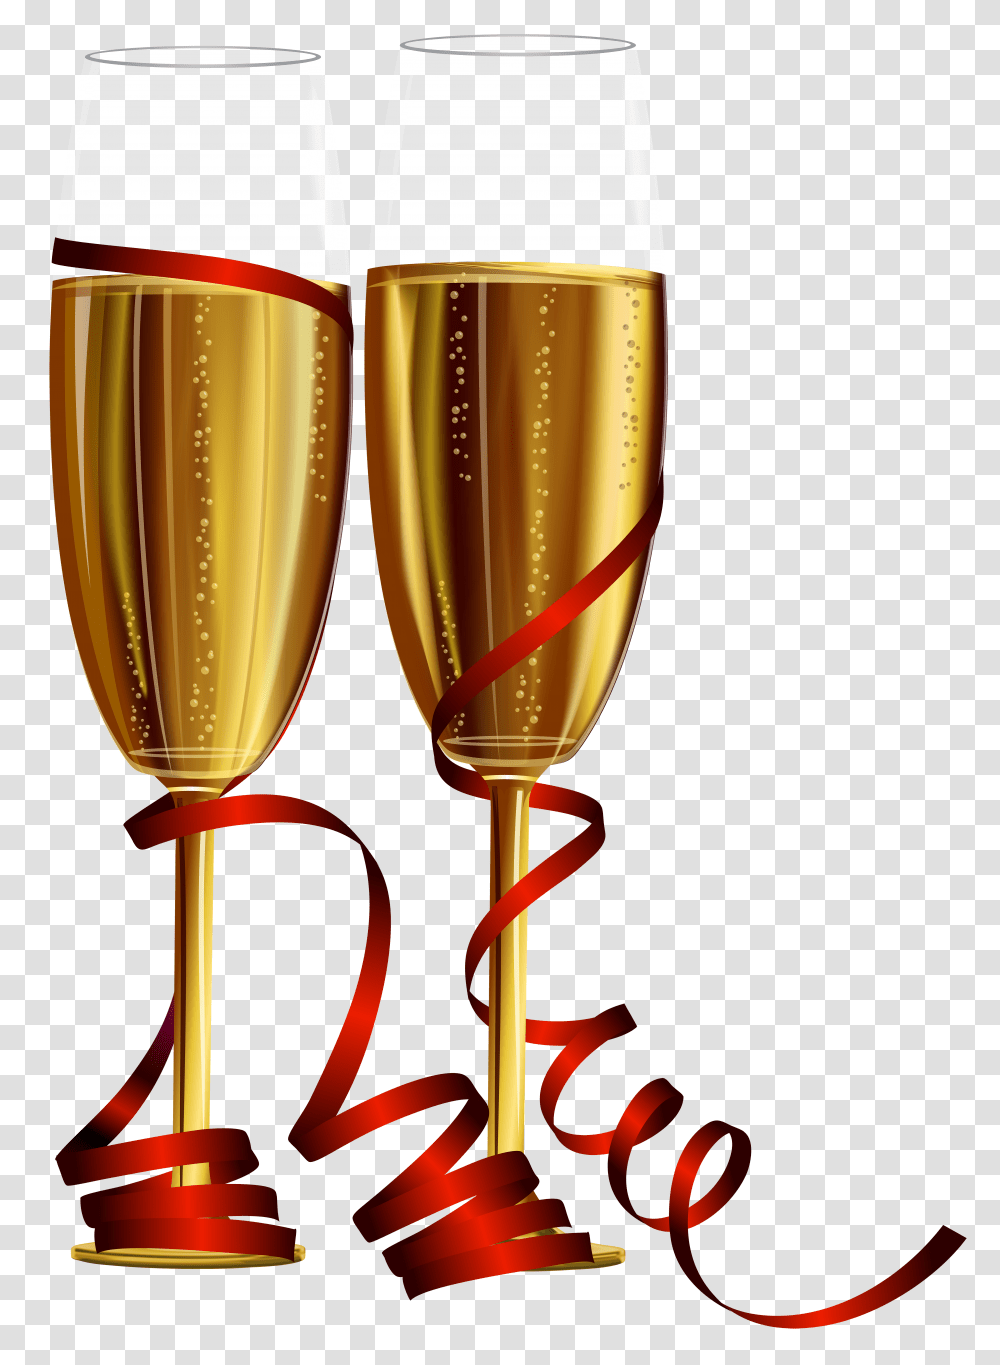 New Year Champagne Glasses Clip, Beverage, Drink, Alcohol, Wine Transparent Png